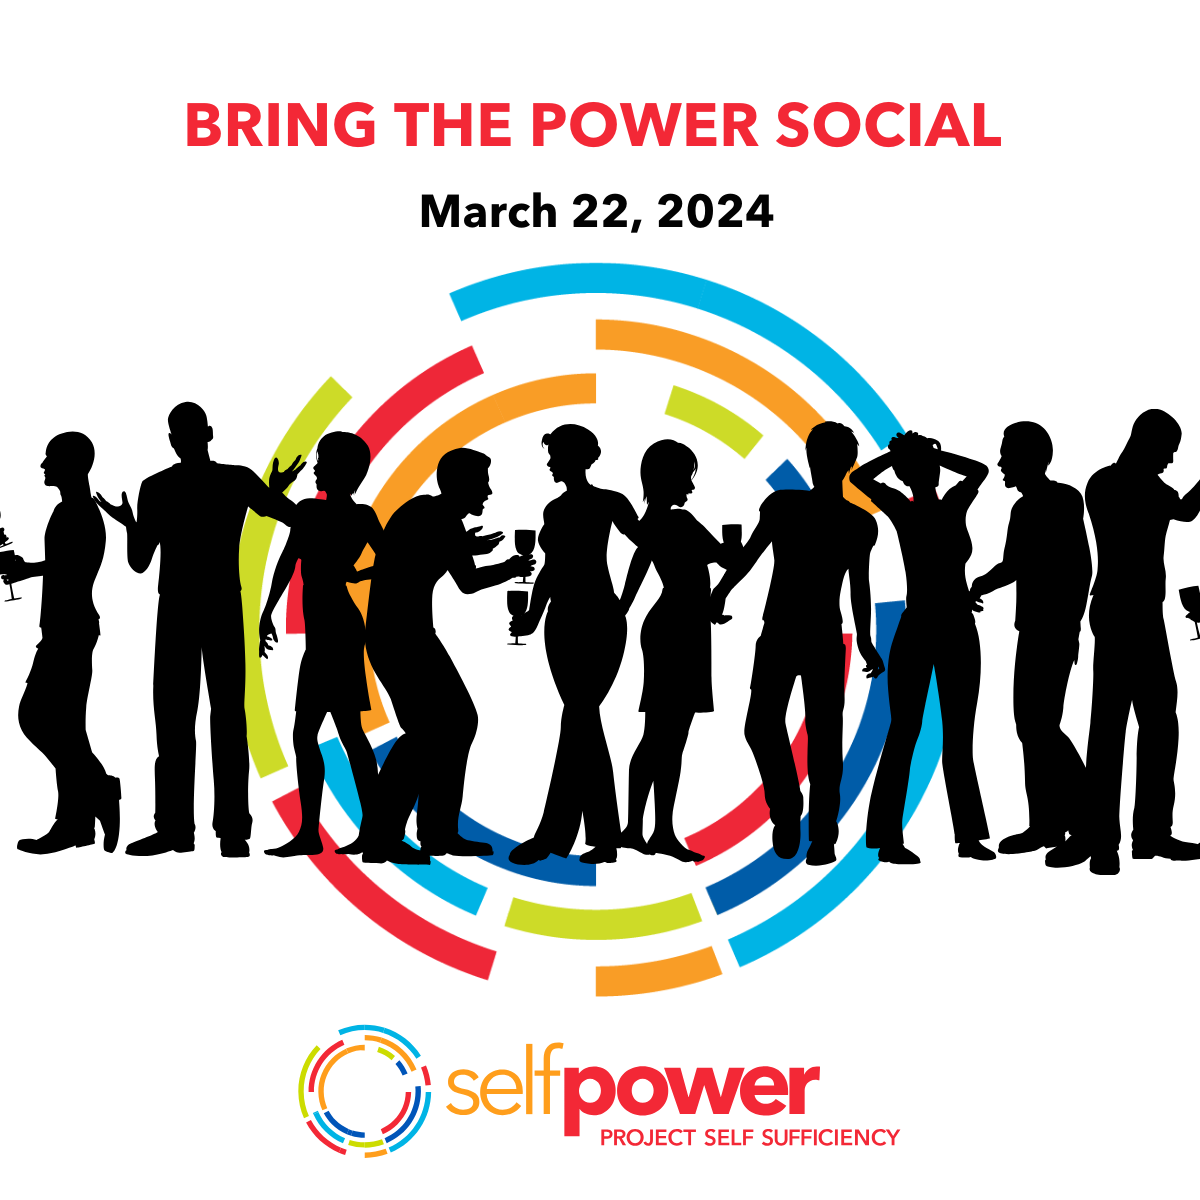 Event Promo Photo For 2024 Bring the Power Social